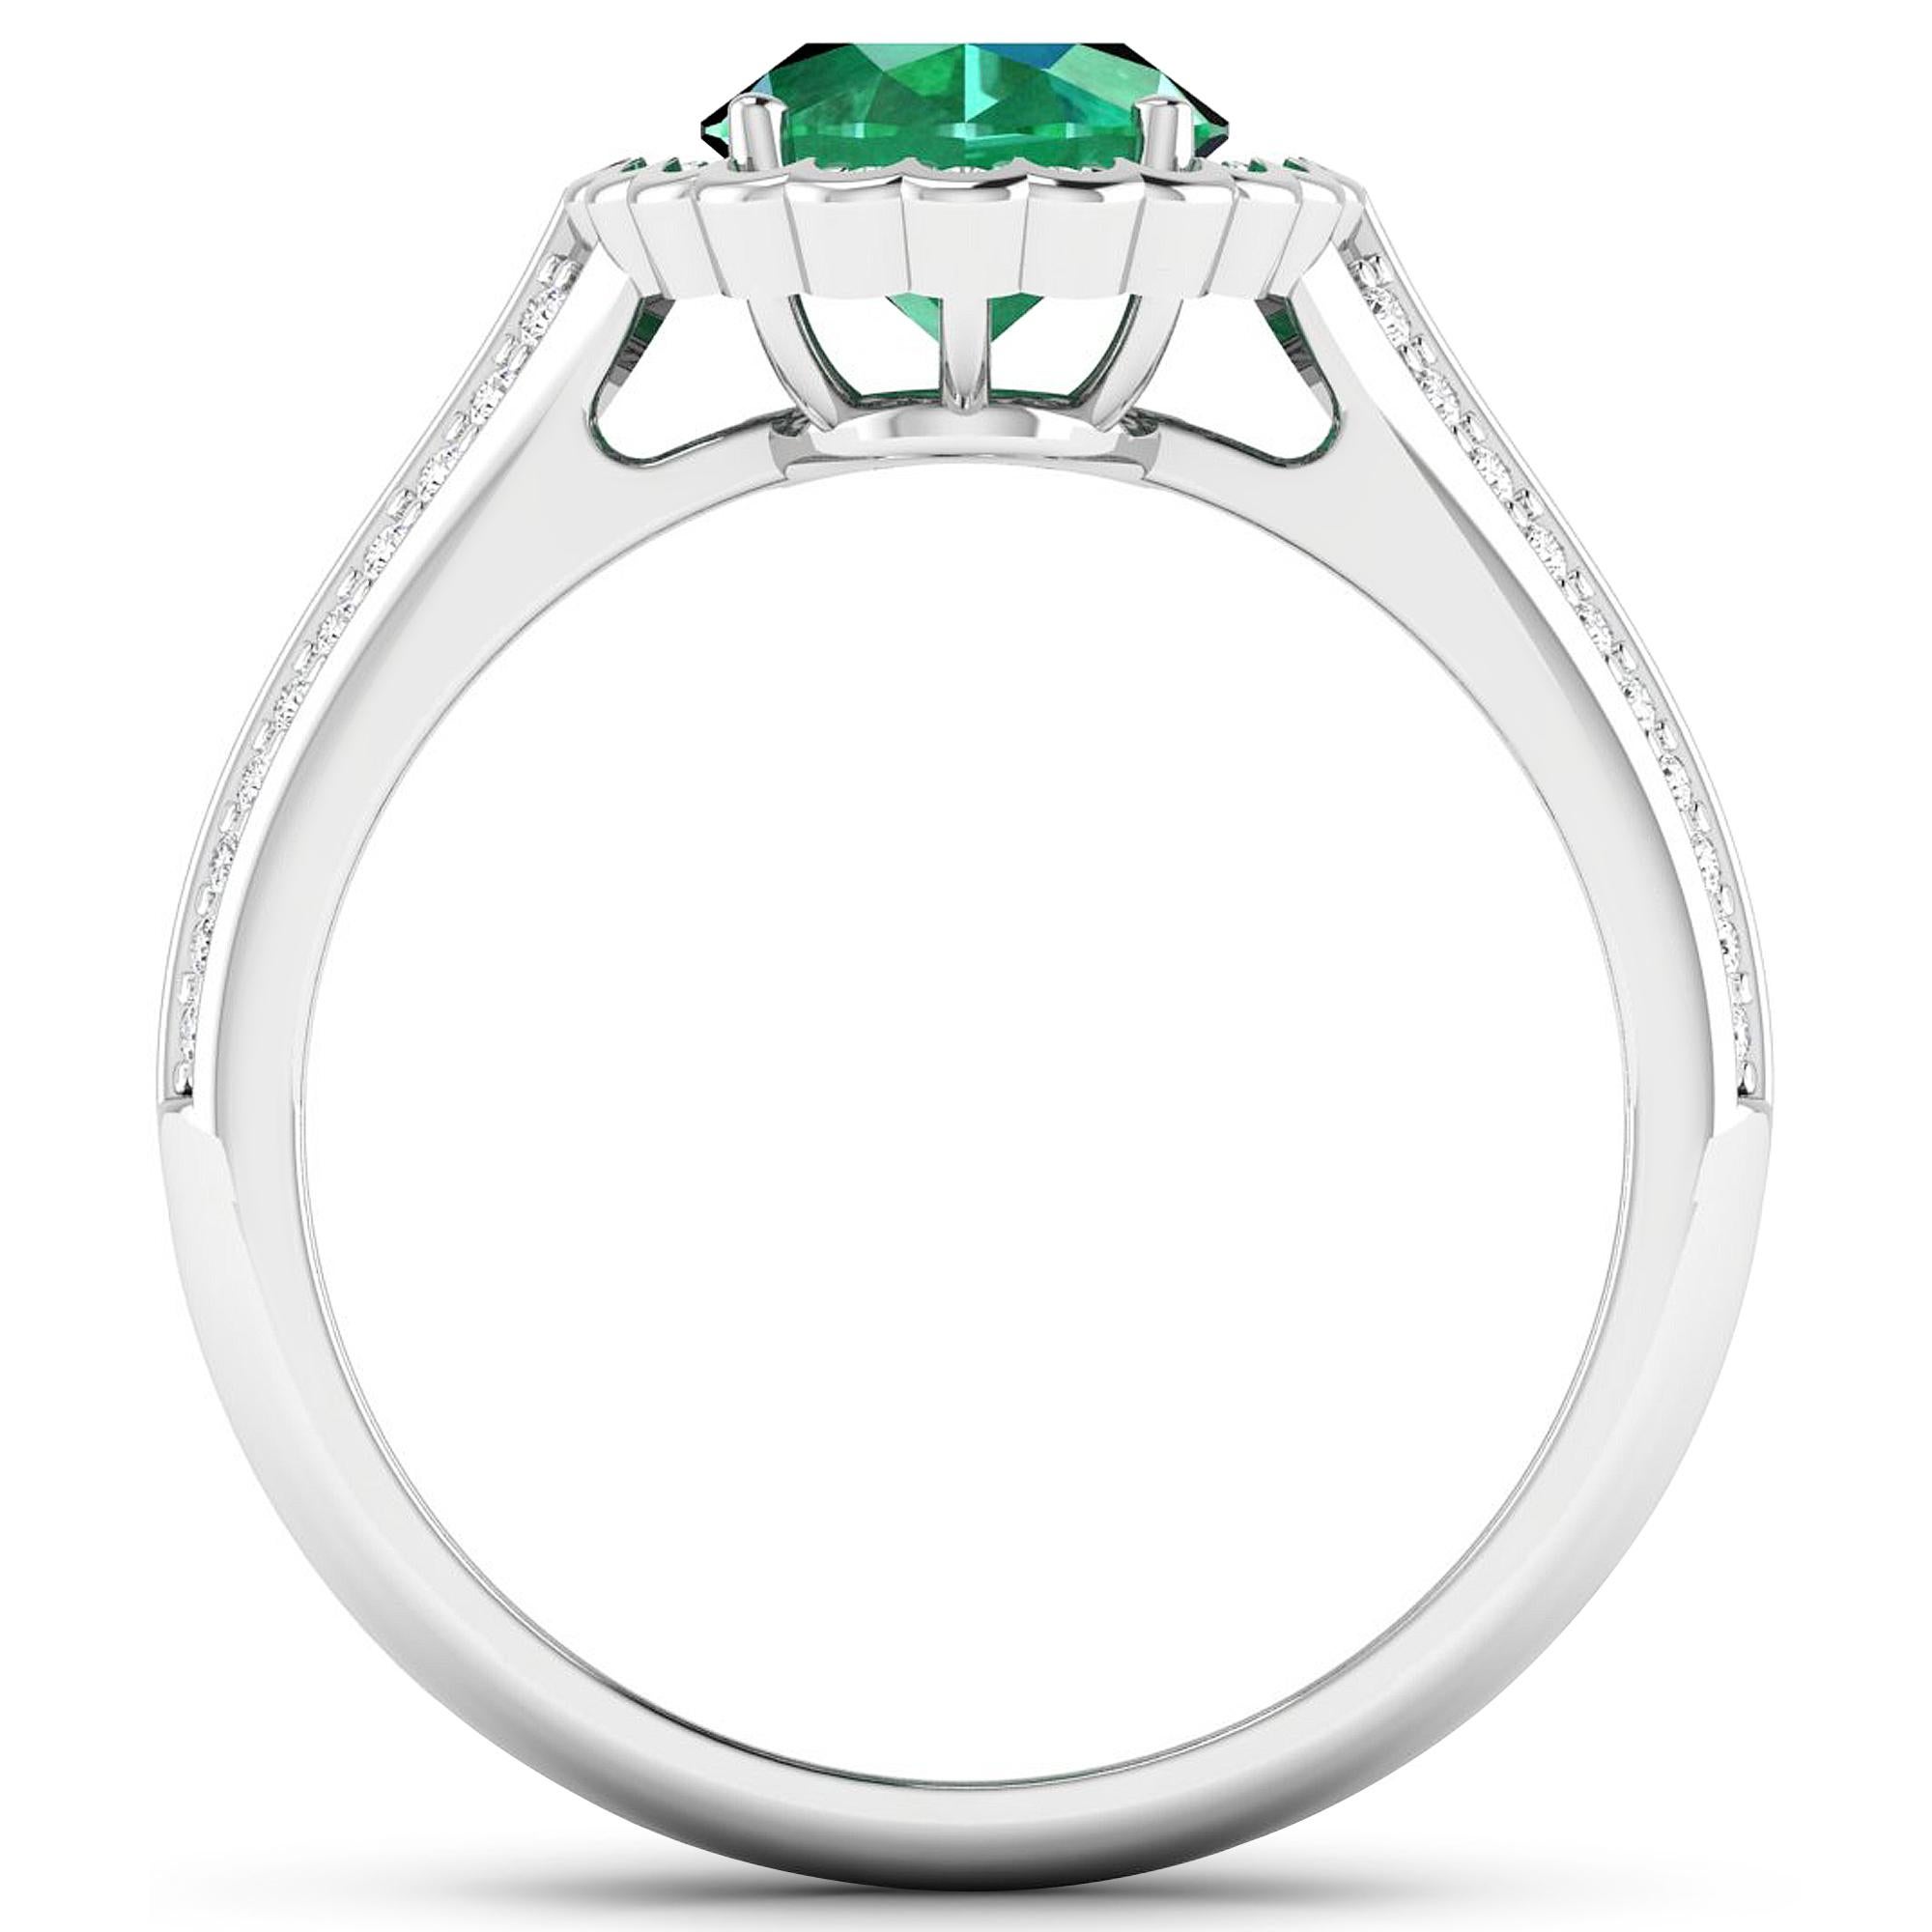 Emerald Gold Ring, 14Kt Gold Emerald & Diamond Engagement Ring, 2.07ctw.

Flaunt yourself with this 14K white Gold Emerald & White Diamond Engagement Ring. The setting is inlaid with 62 accented full-cut White Diamond round stones for a total stone